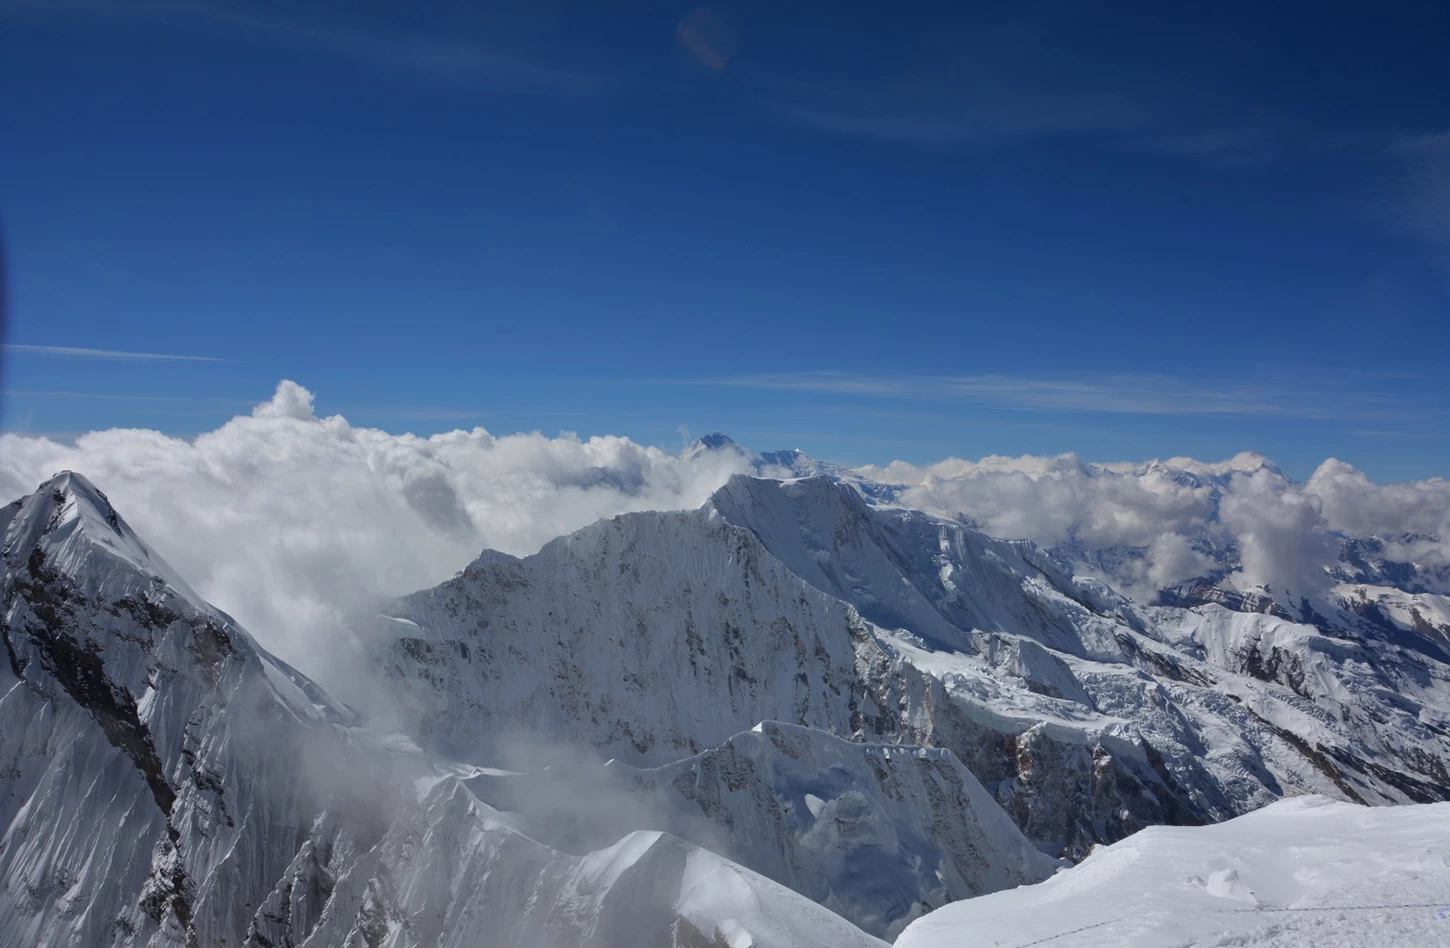 Himlung Expedition (7126m)'s feature image